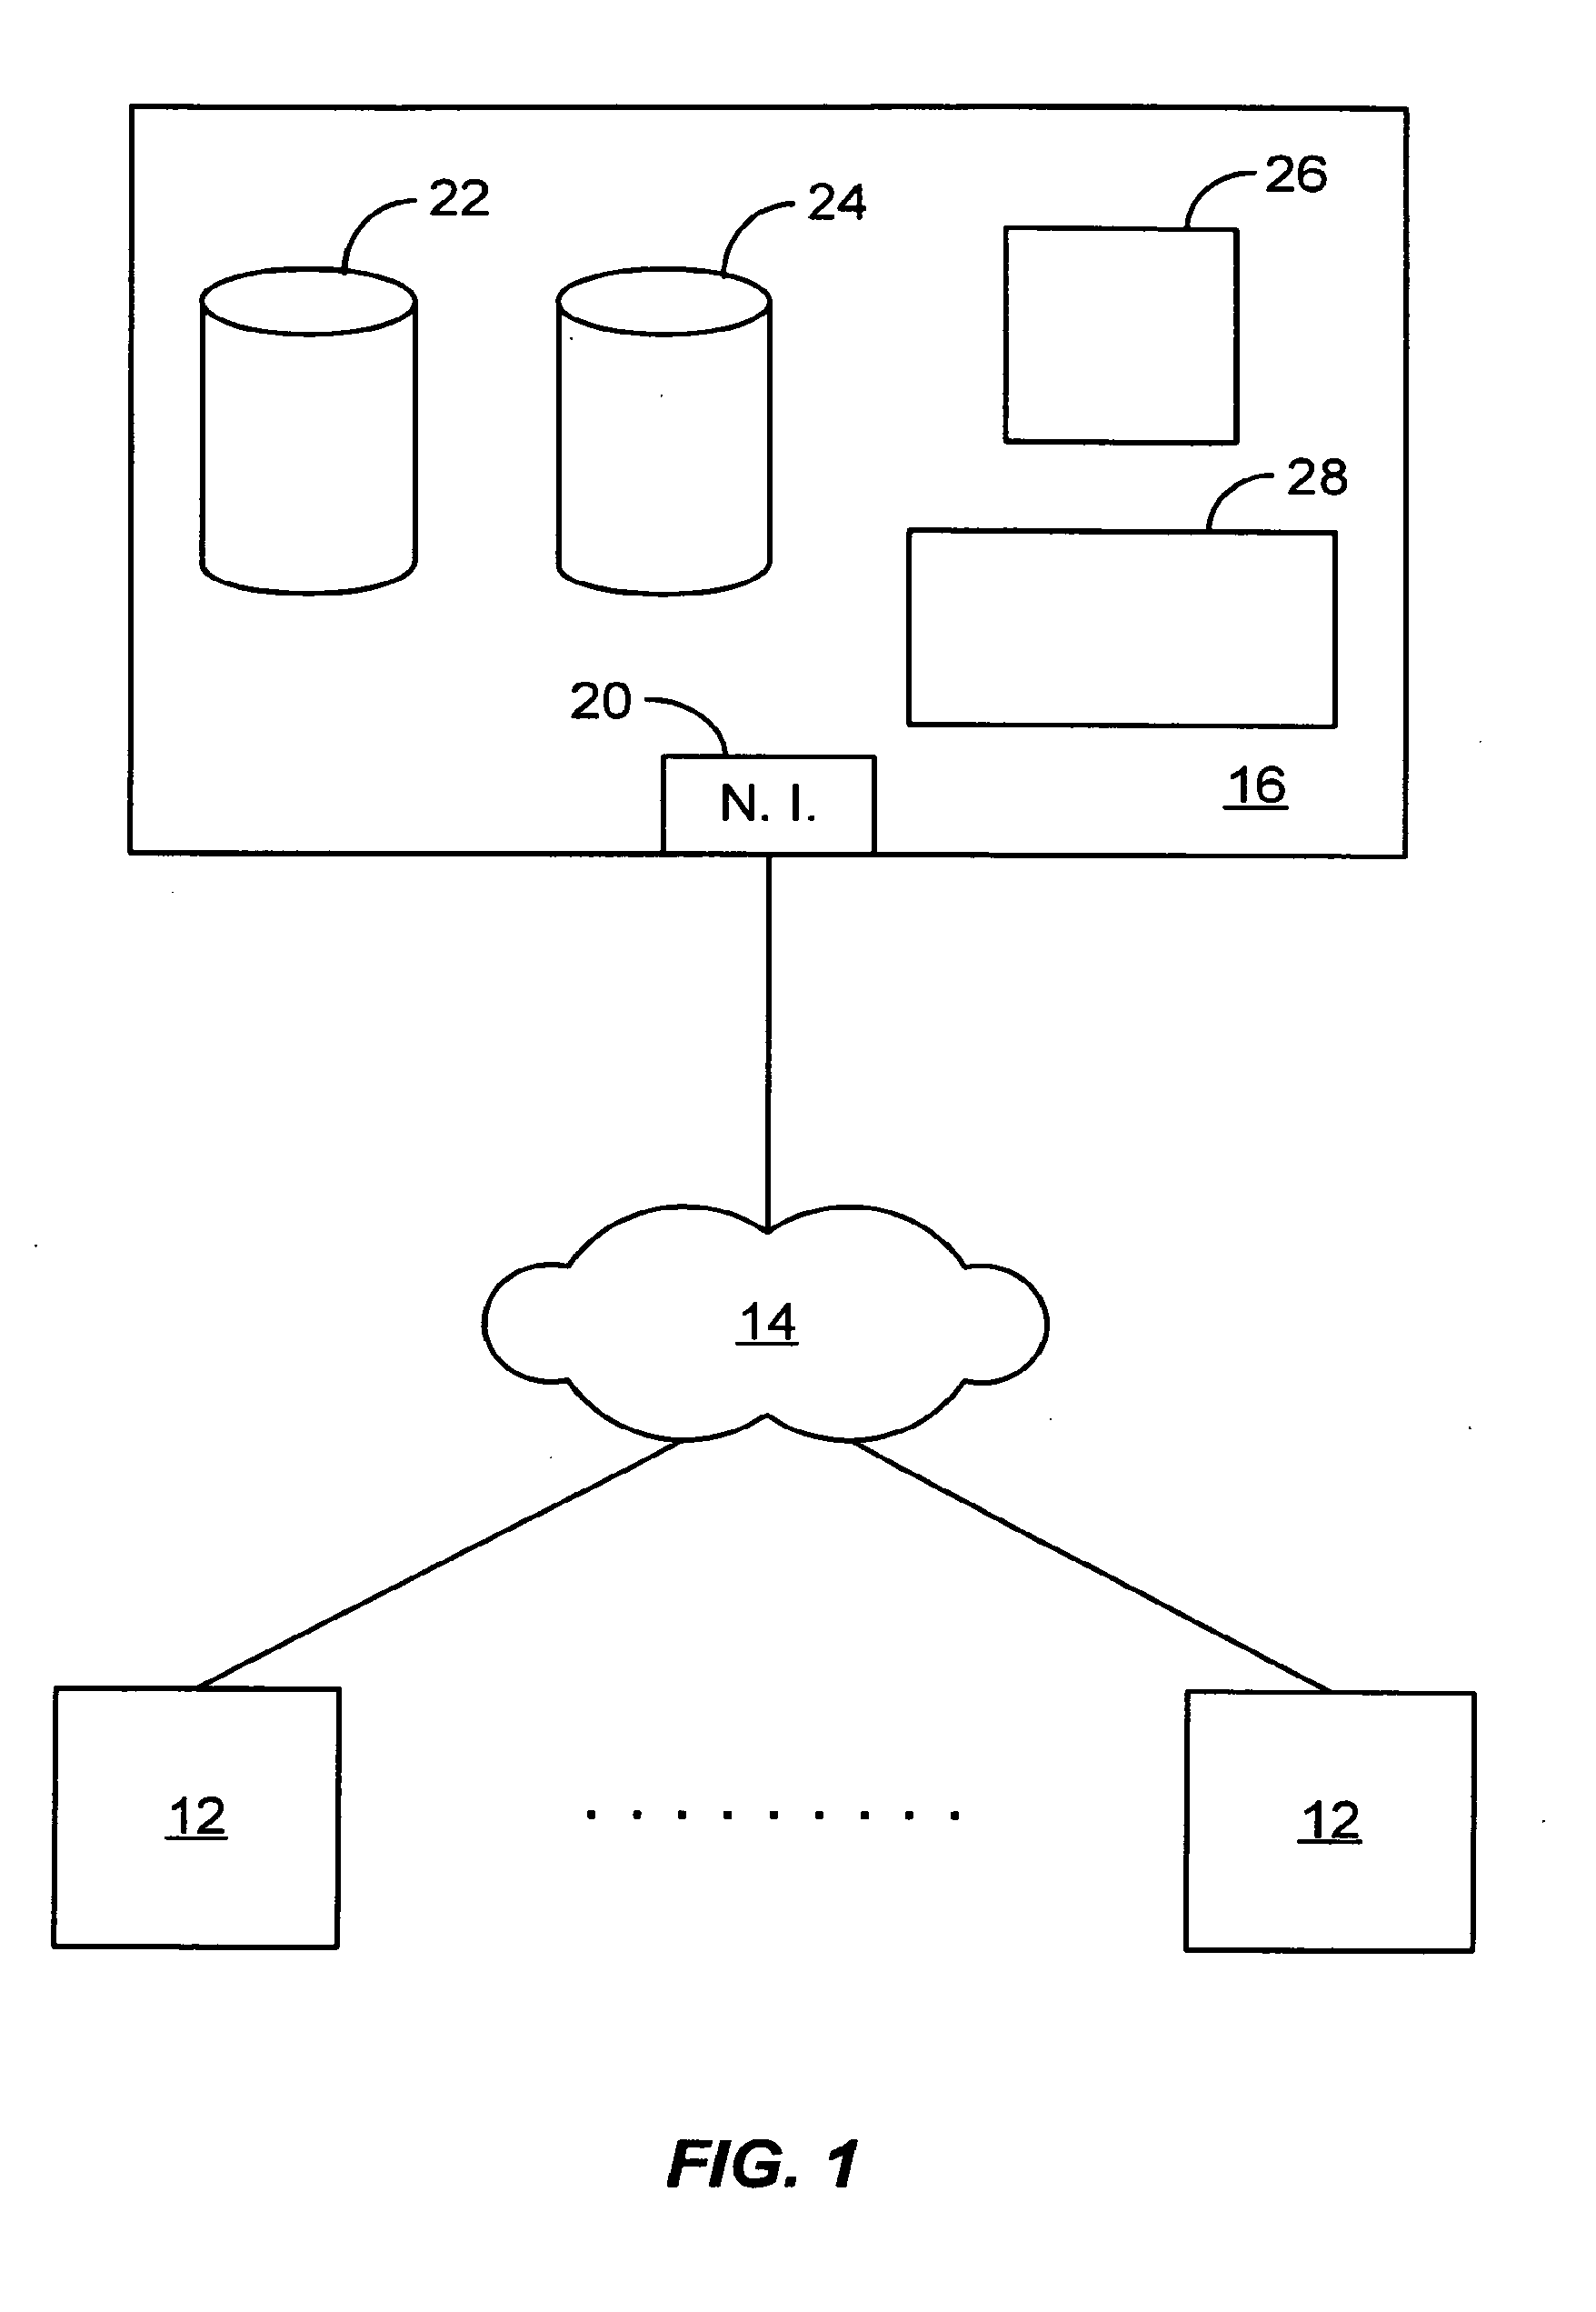 Methods and systems for optimizing text searches over structured data in a multi-tenant environment